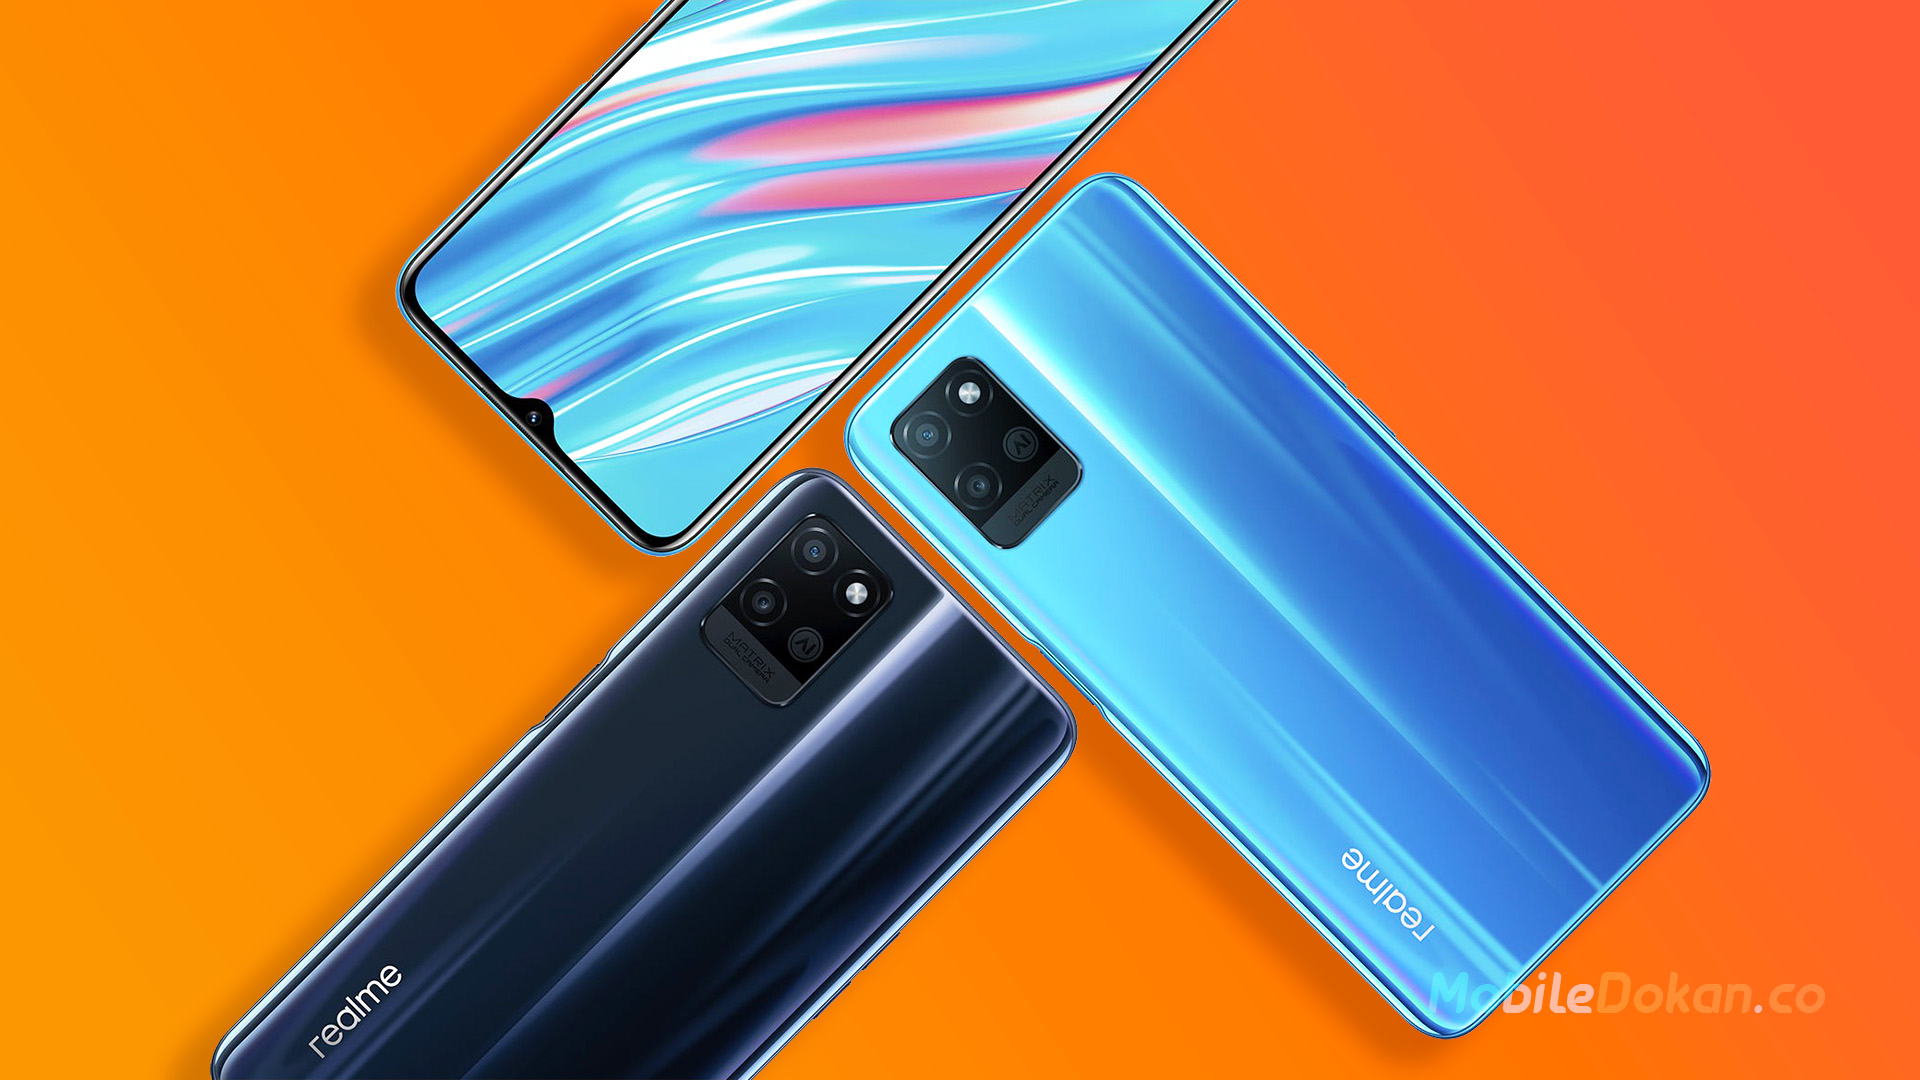 Realme V11 5G announced with specification